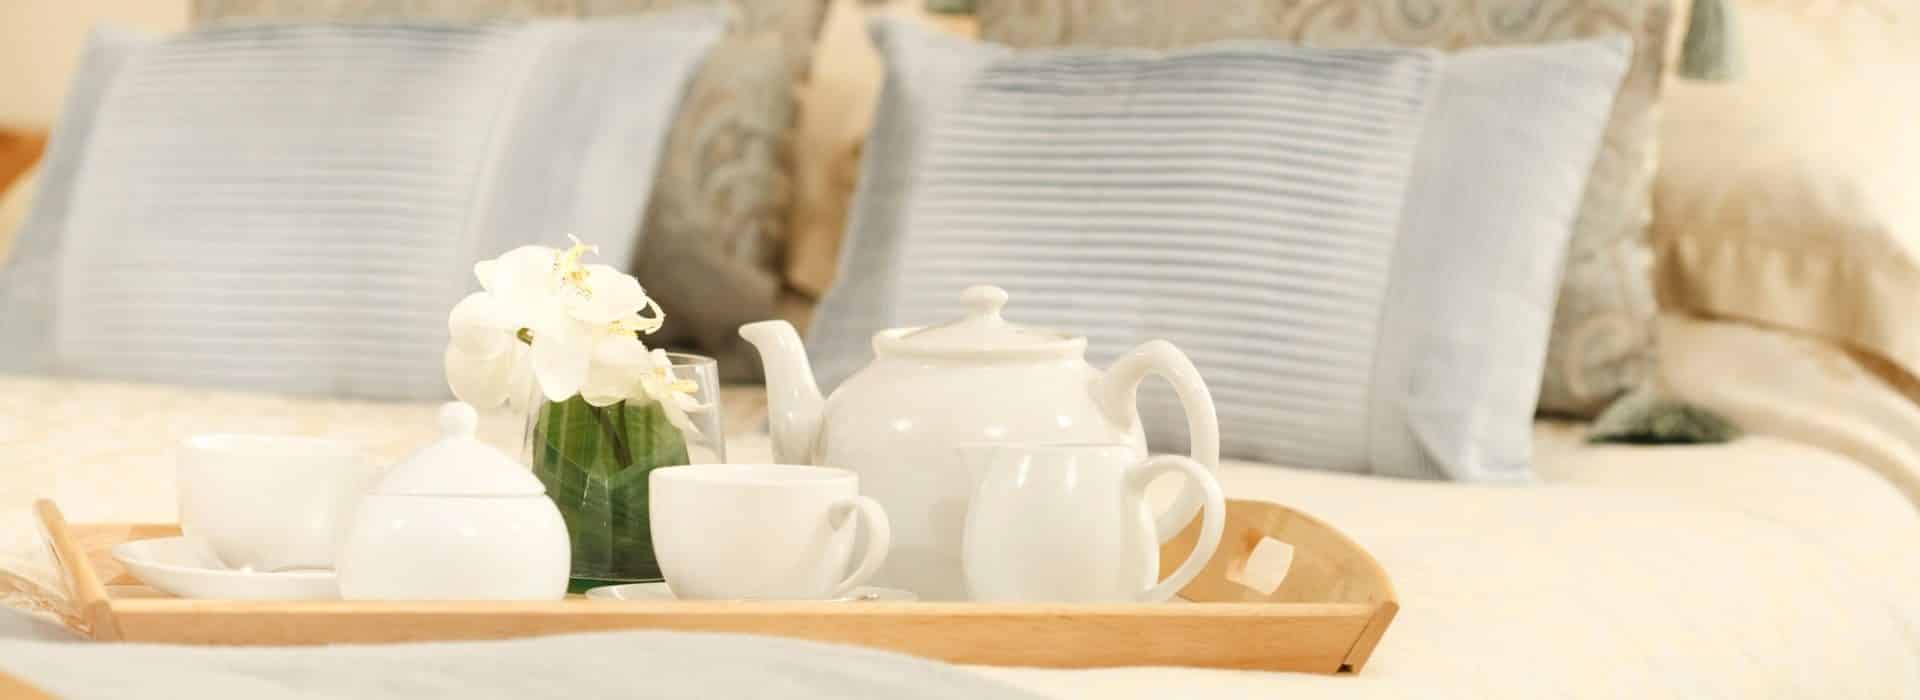 Wooden tray with white tea set on top of bed